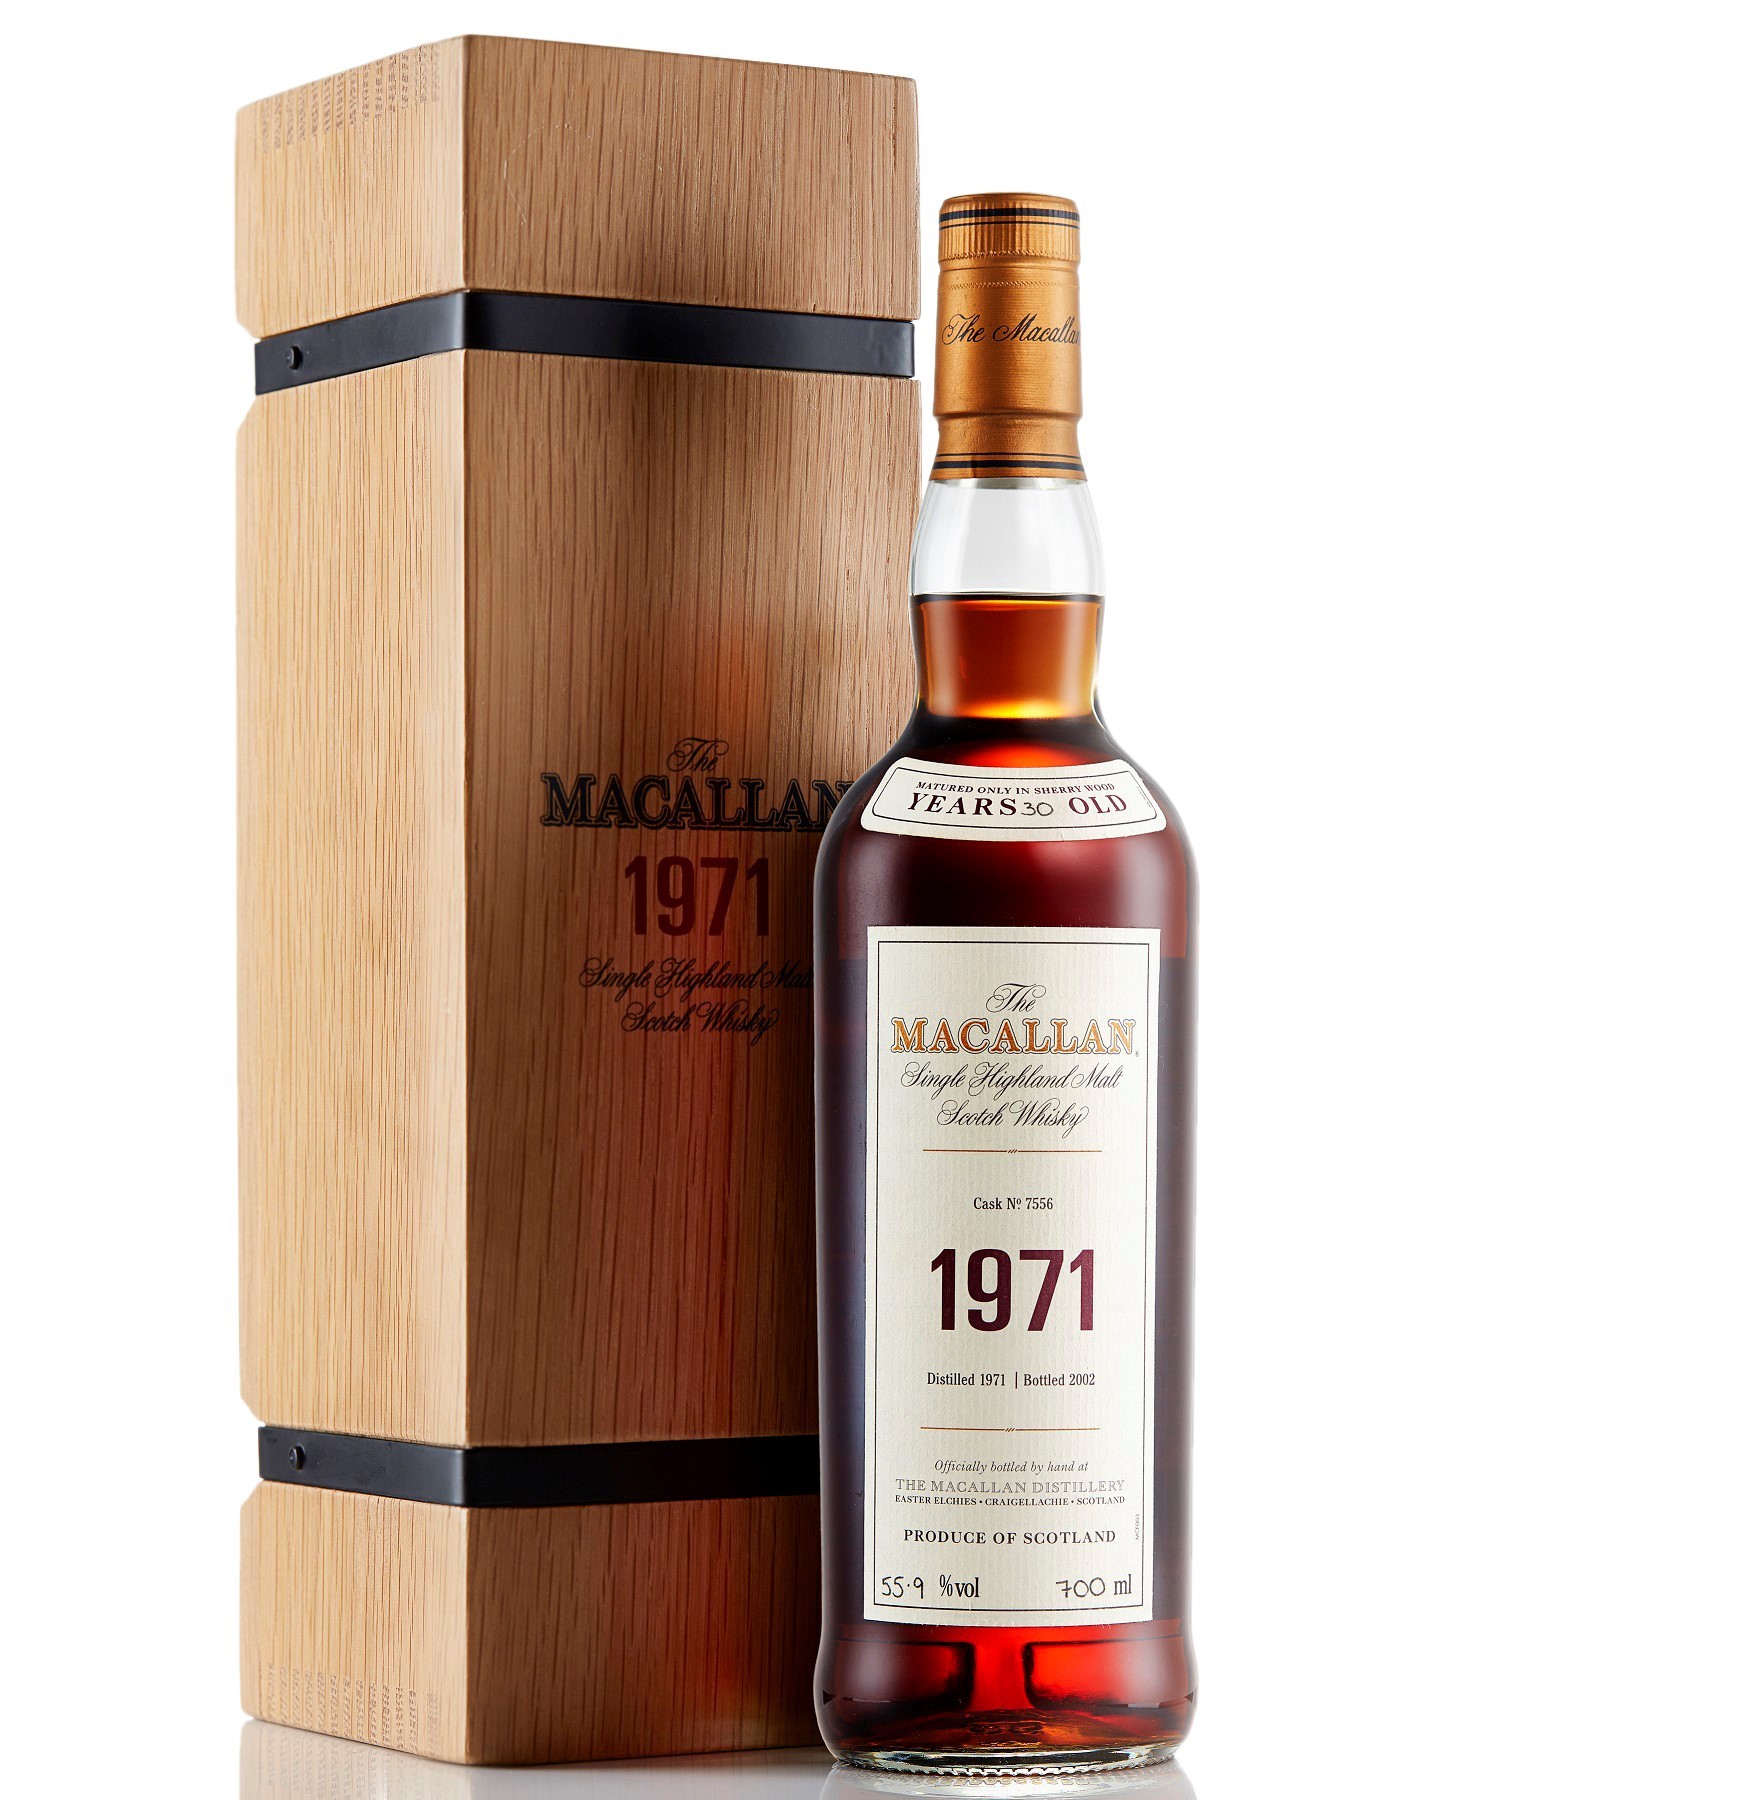 THE MACALLAN FINE AND RARE 1971 30 YEAR OLD 